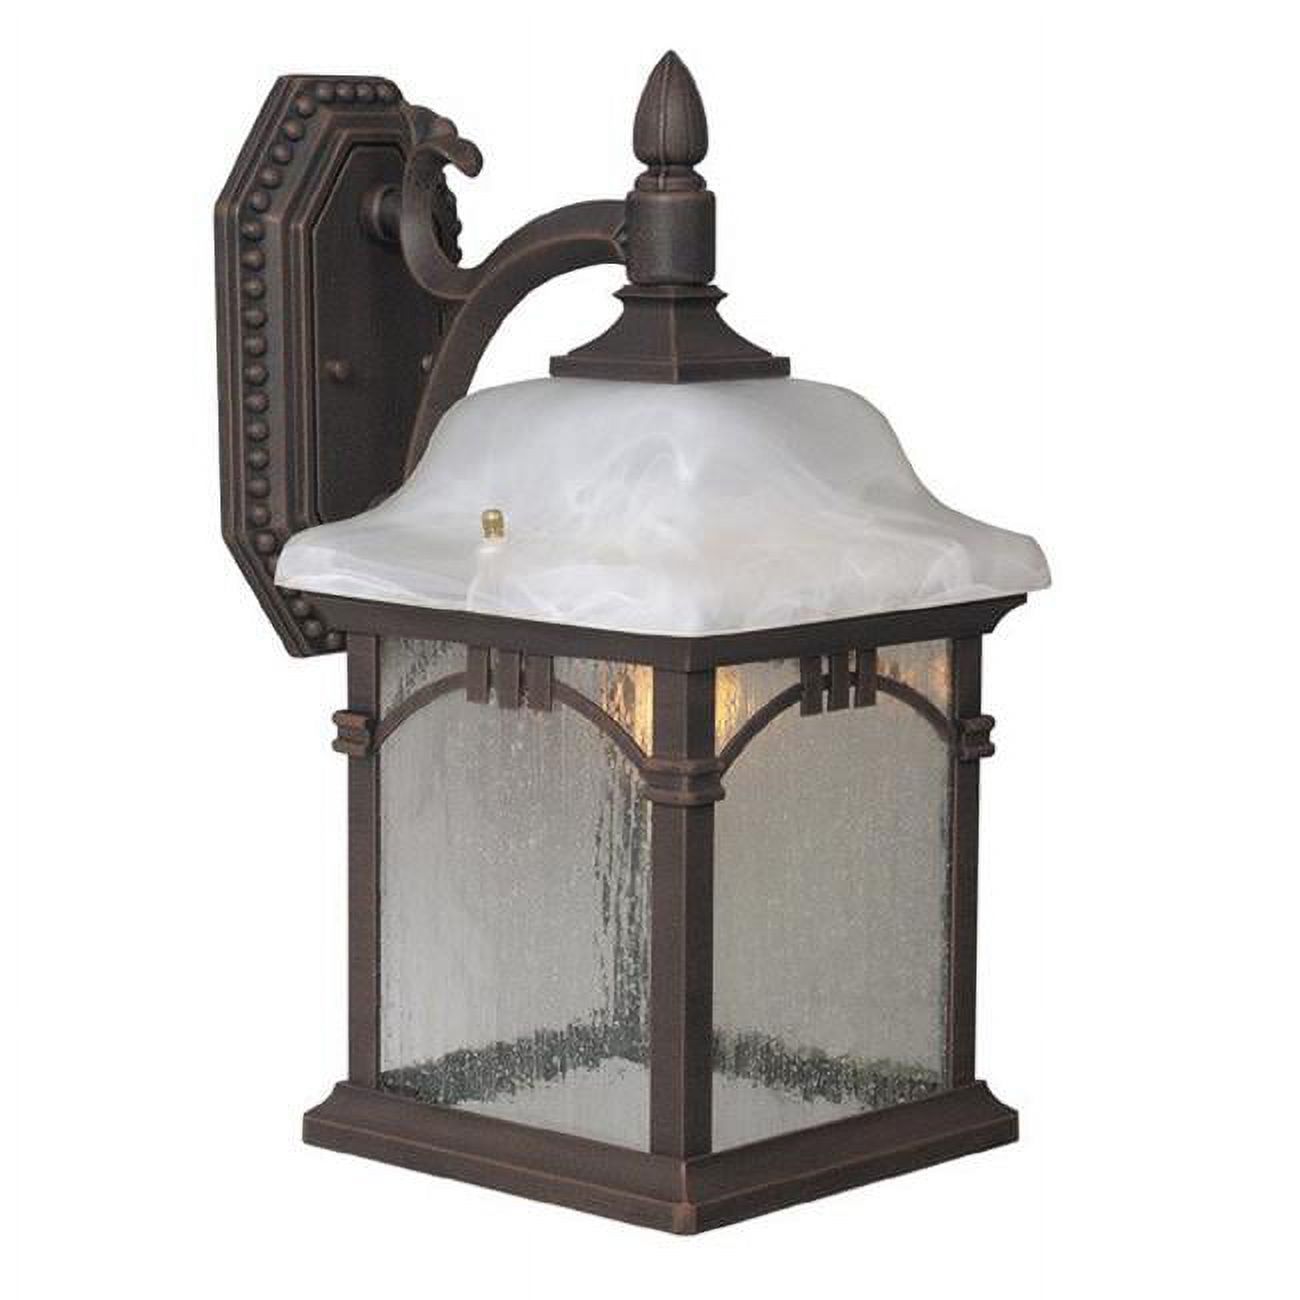 Special Lite Products Sonoma 1-Light Outdoor Wall lantern - image 1 of 2